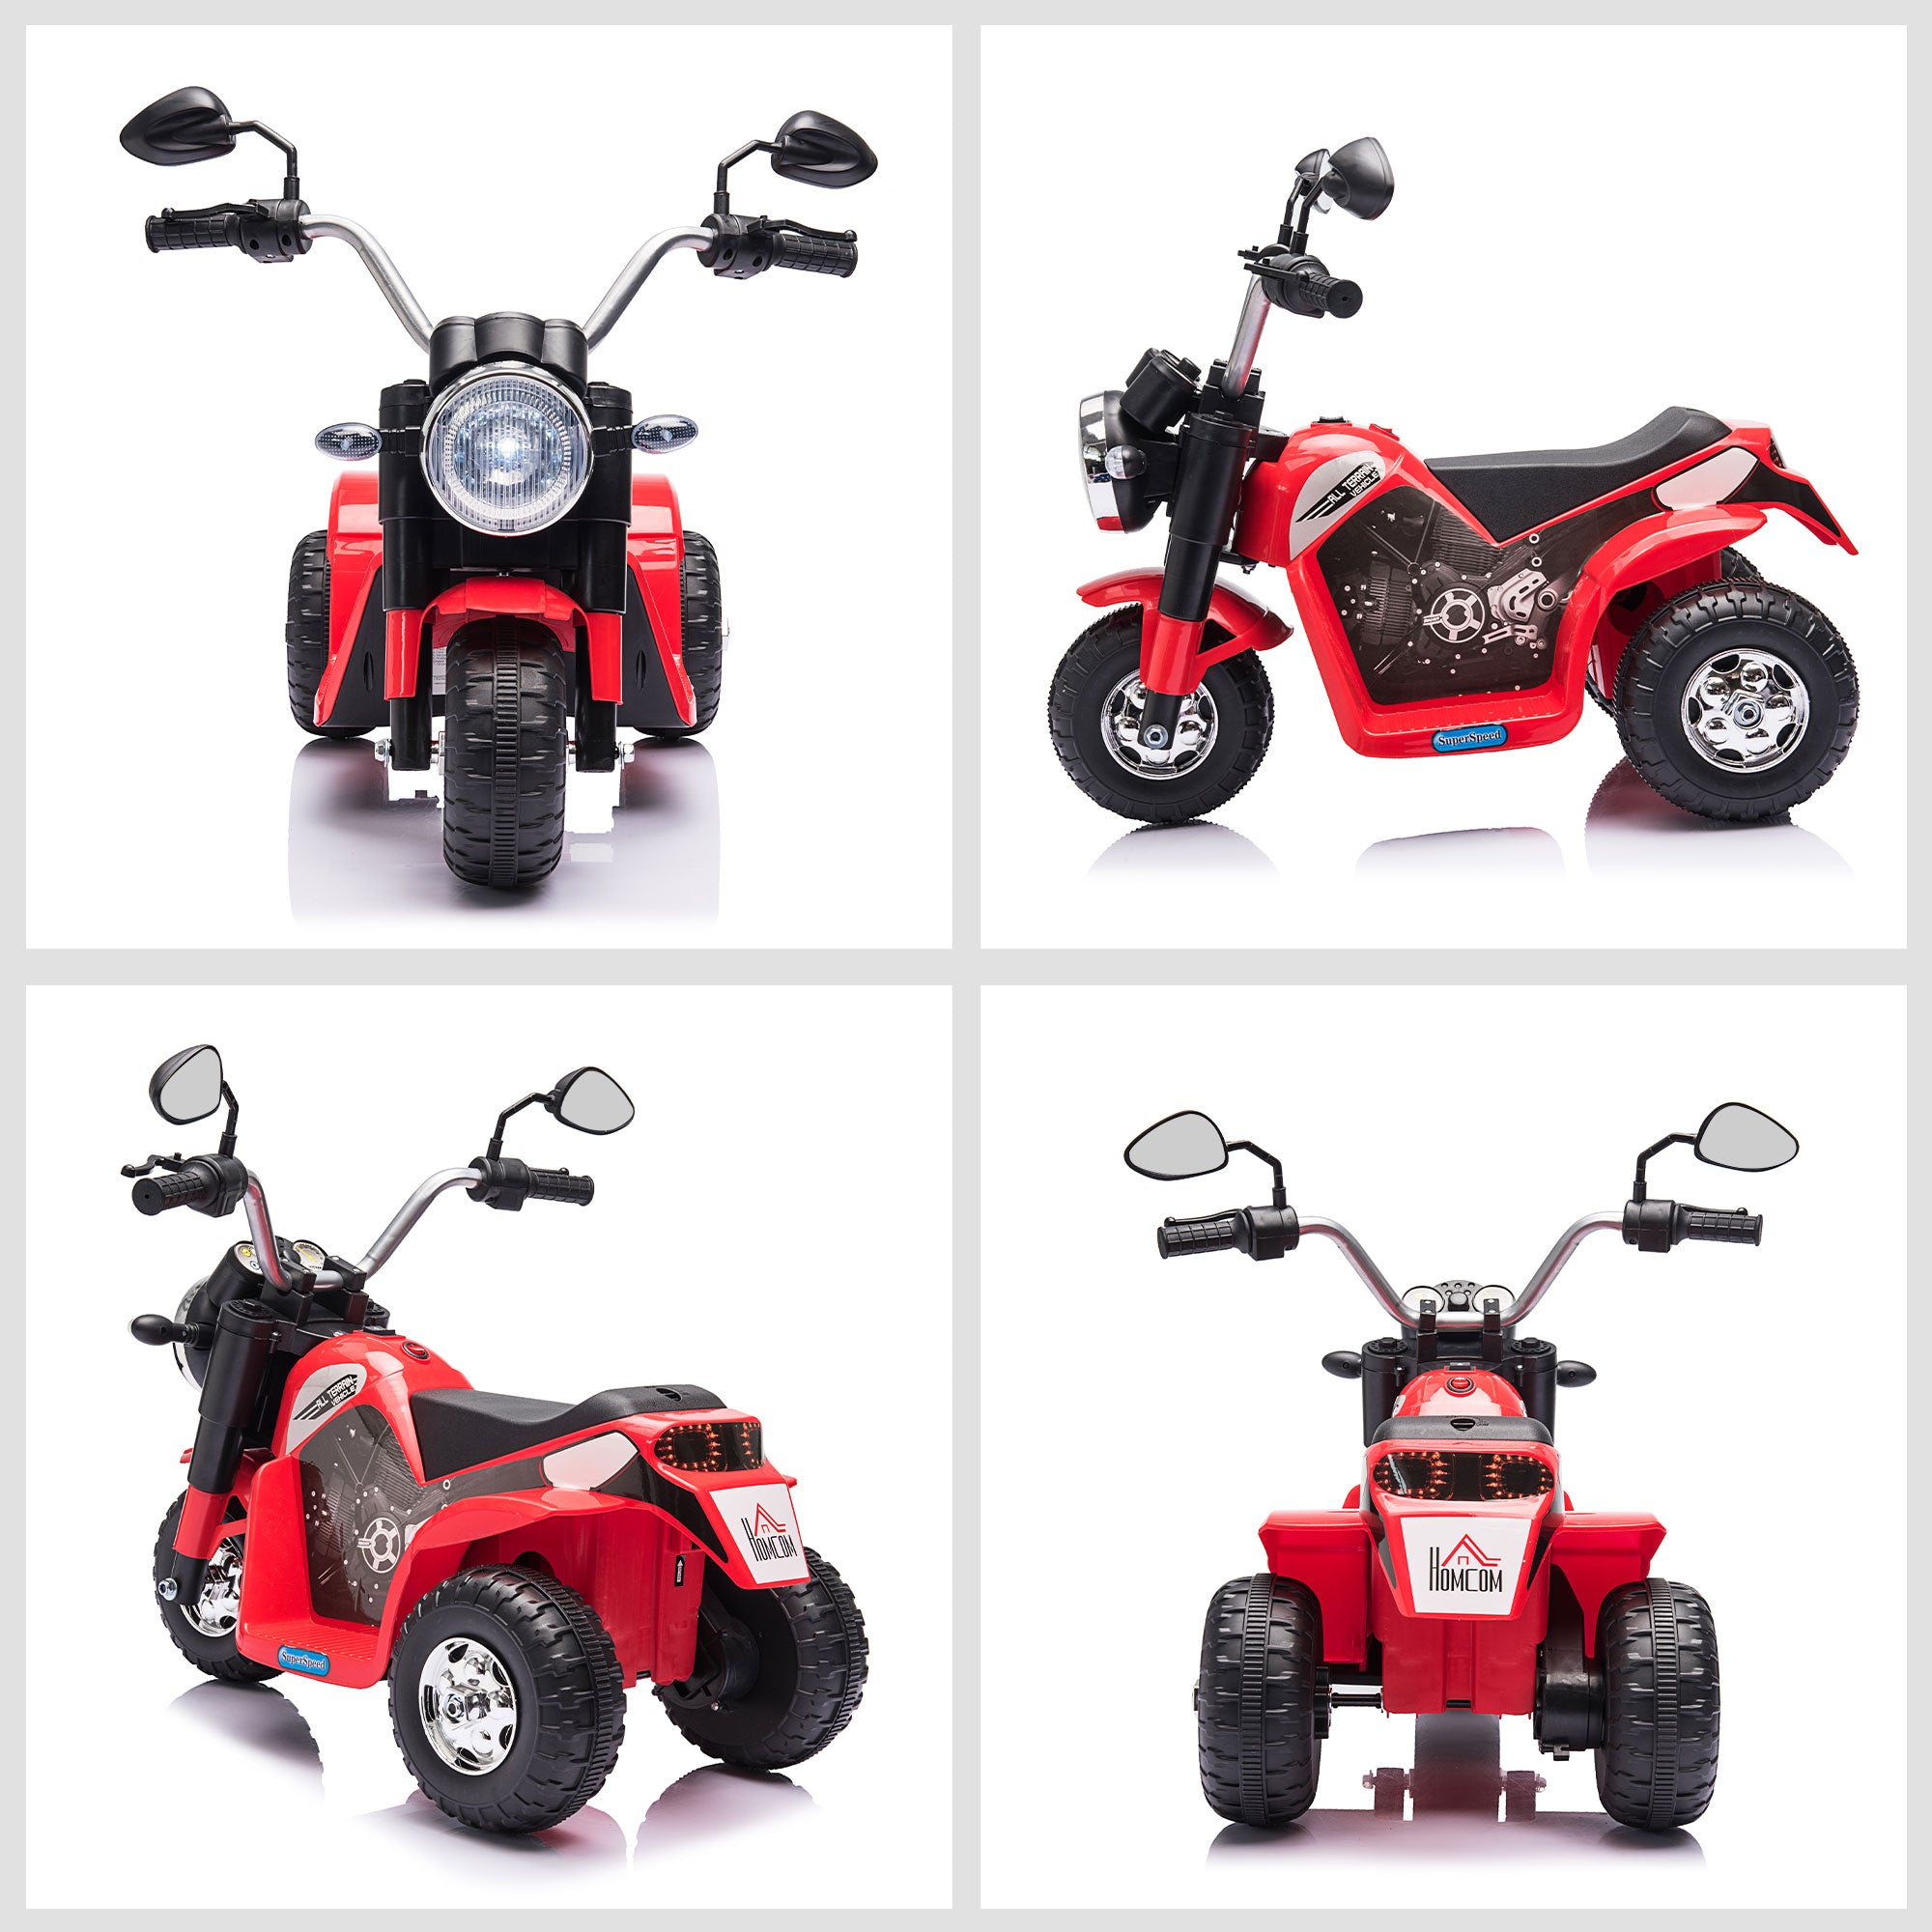 HOMCOM Kids Electric Motorcycle Ride-On Toy 3-Wheels Battery Powered Motorbike Rechargeable 6V with Horn Headlights Motorbike for 18 - 36 Months Red - Inspirely